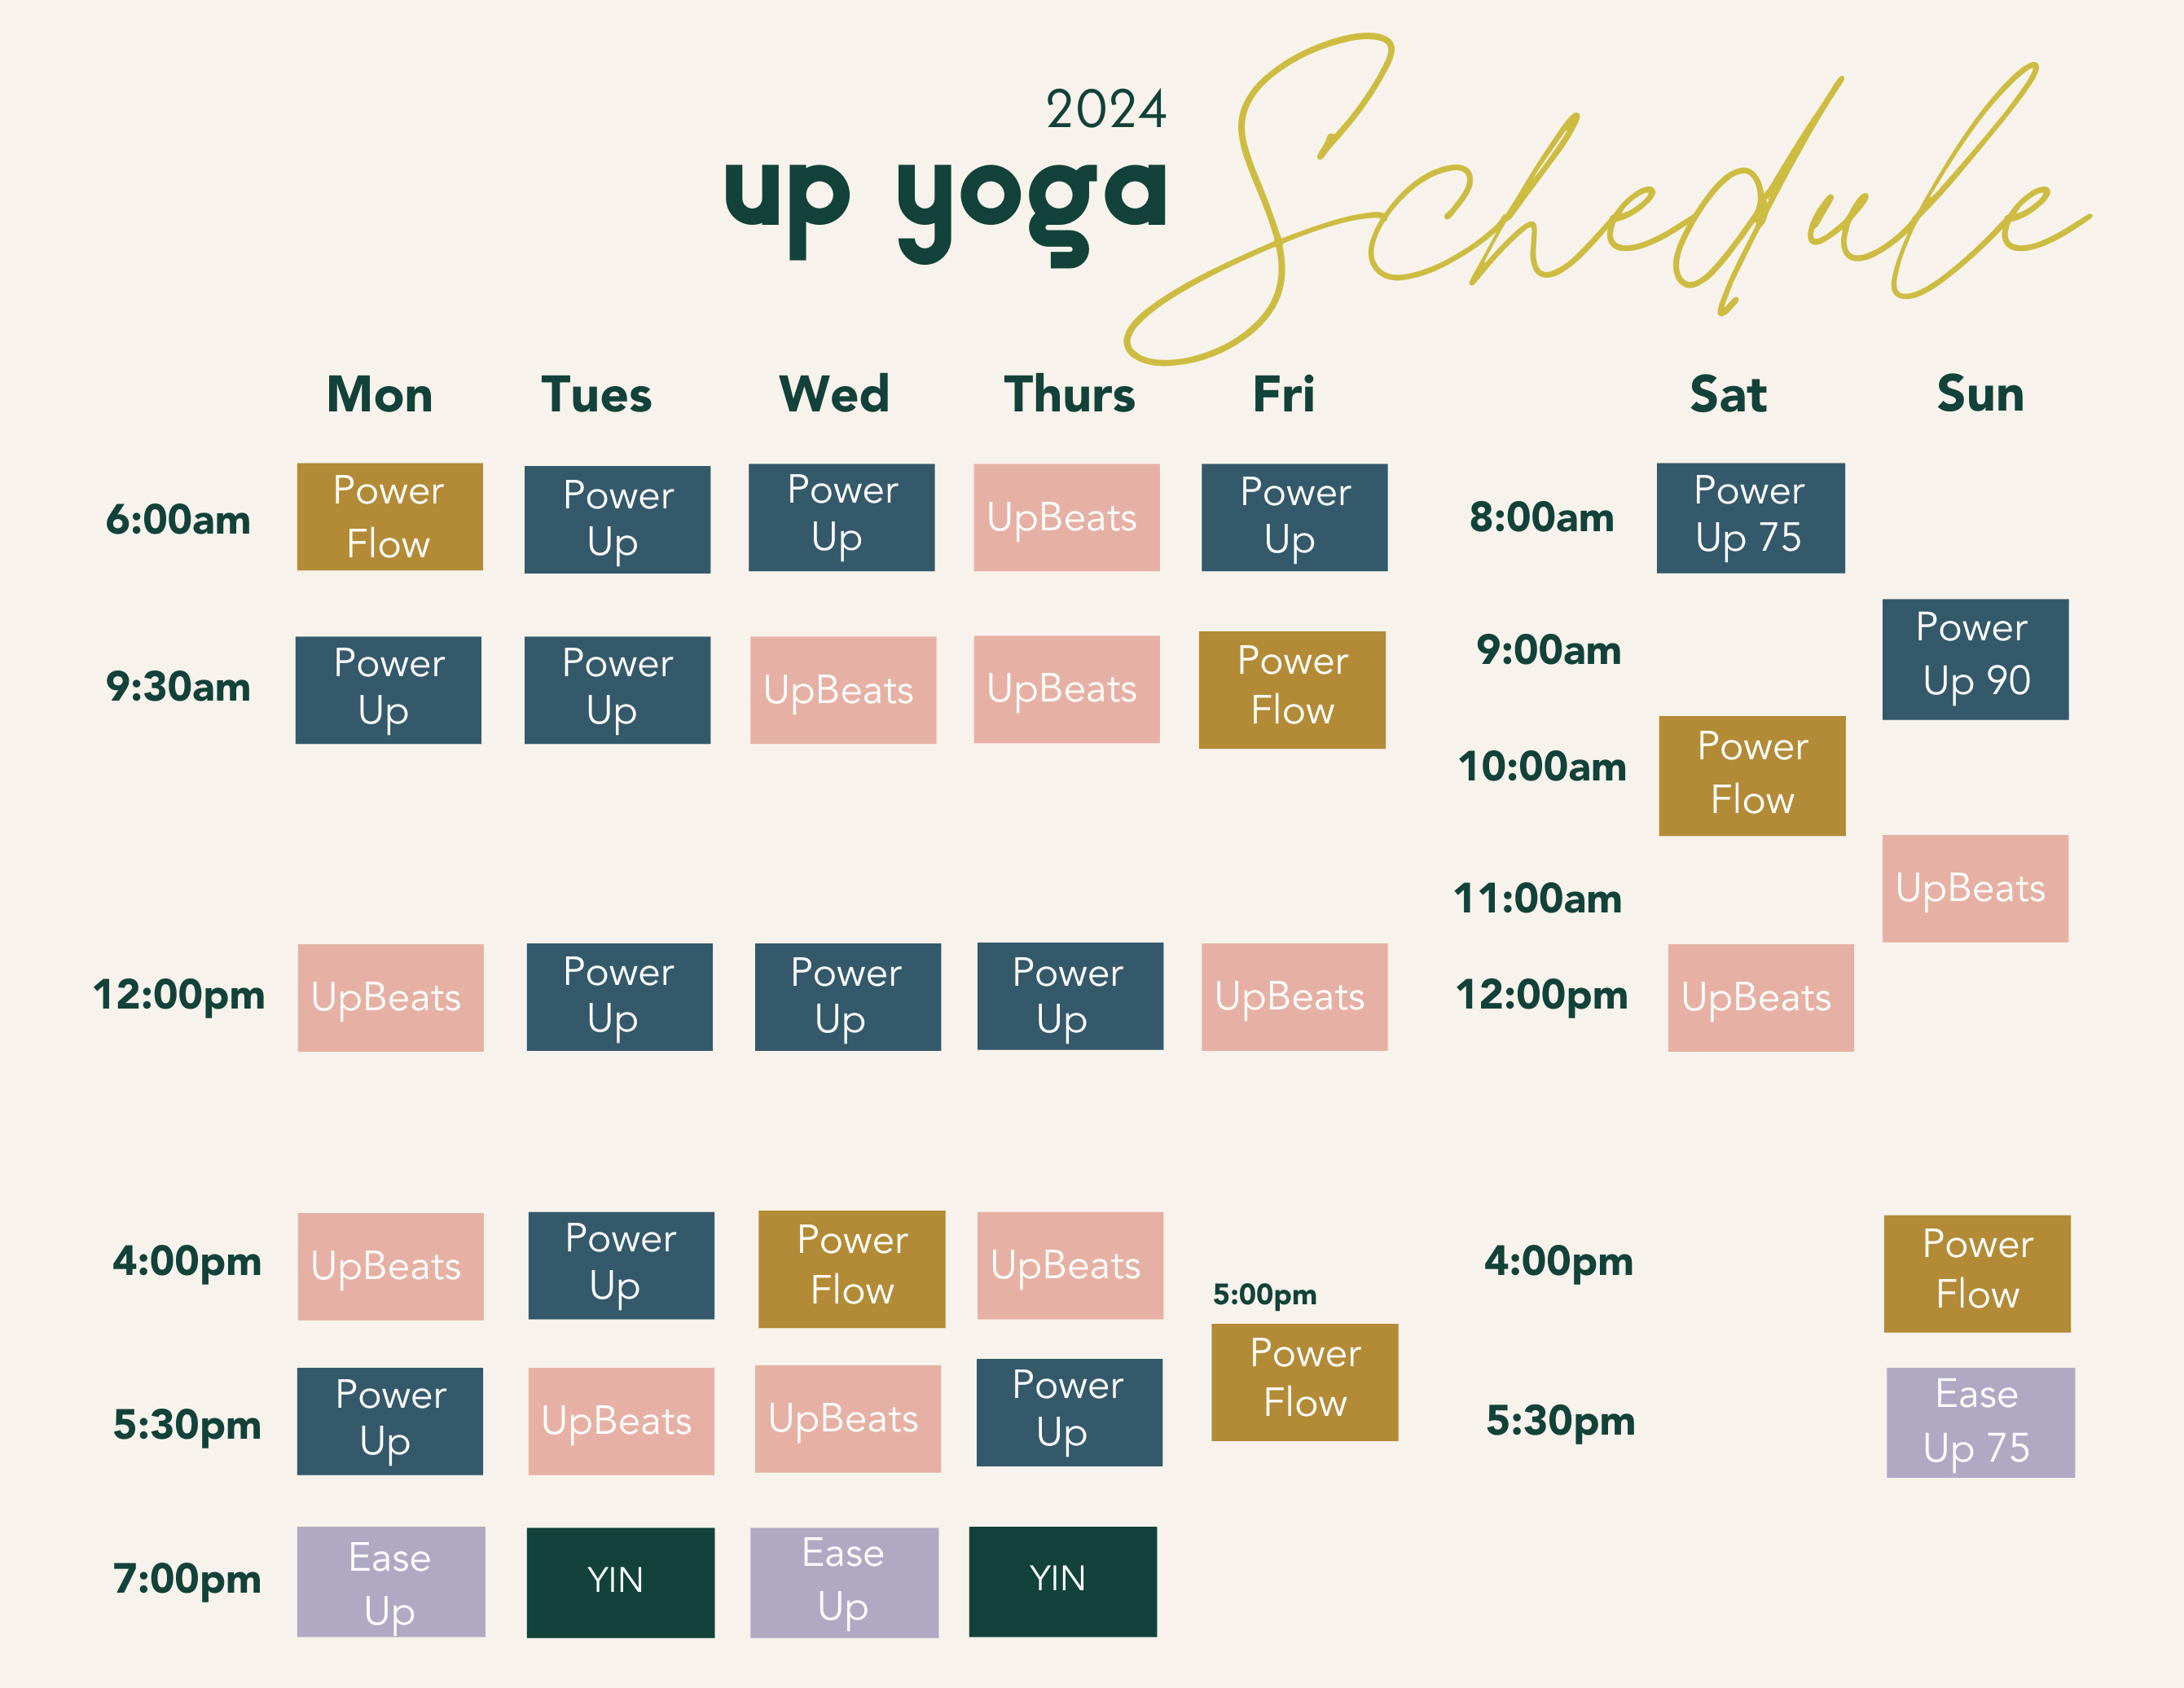 Yoga Intro Offer  Best Yoga in the Twin Cities Minneapolis MN — Up Yoga